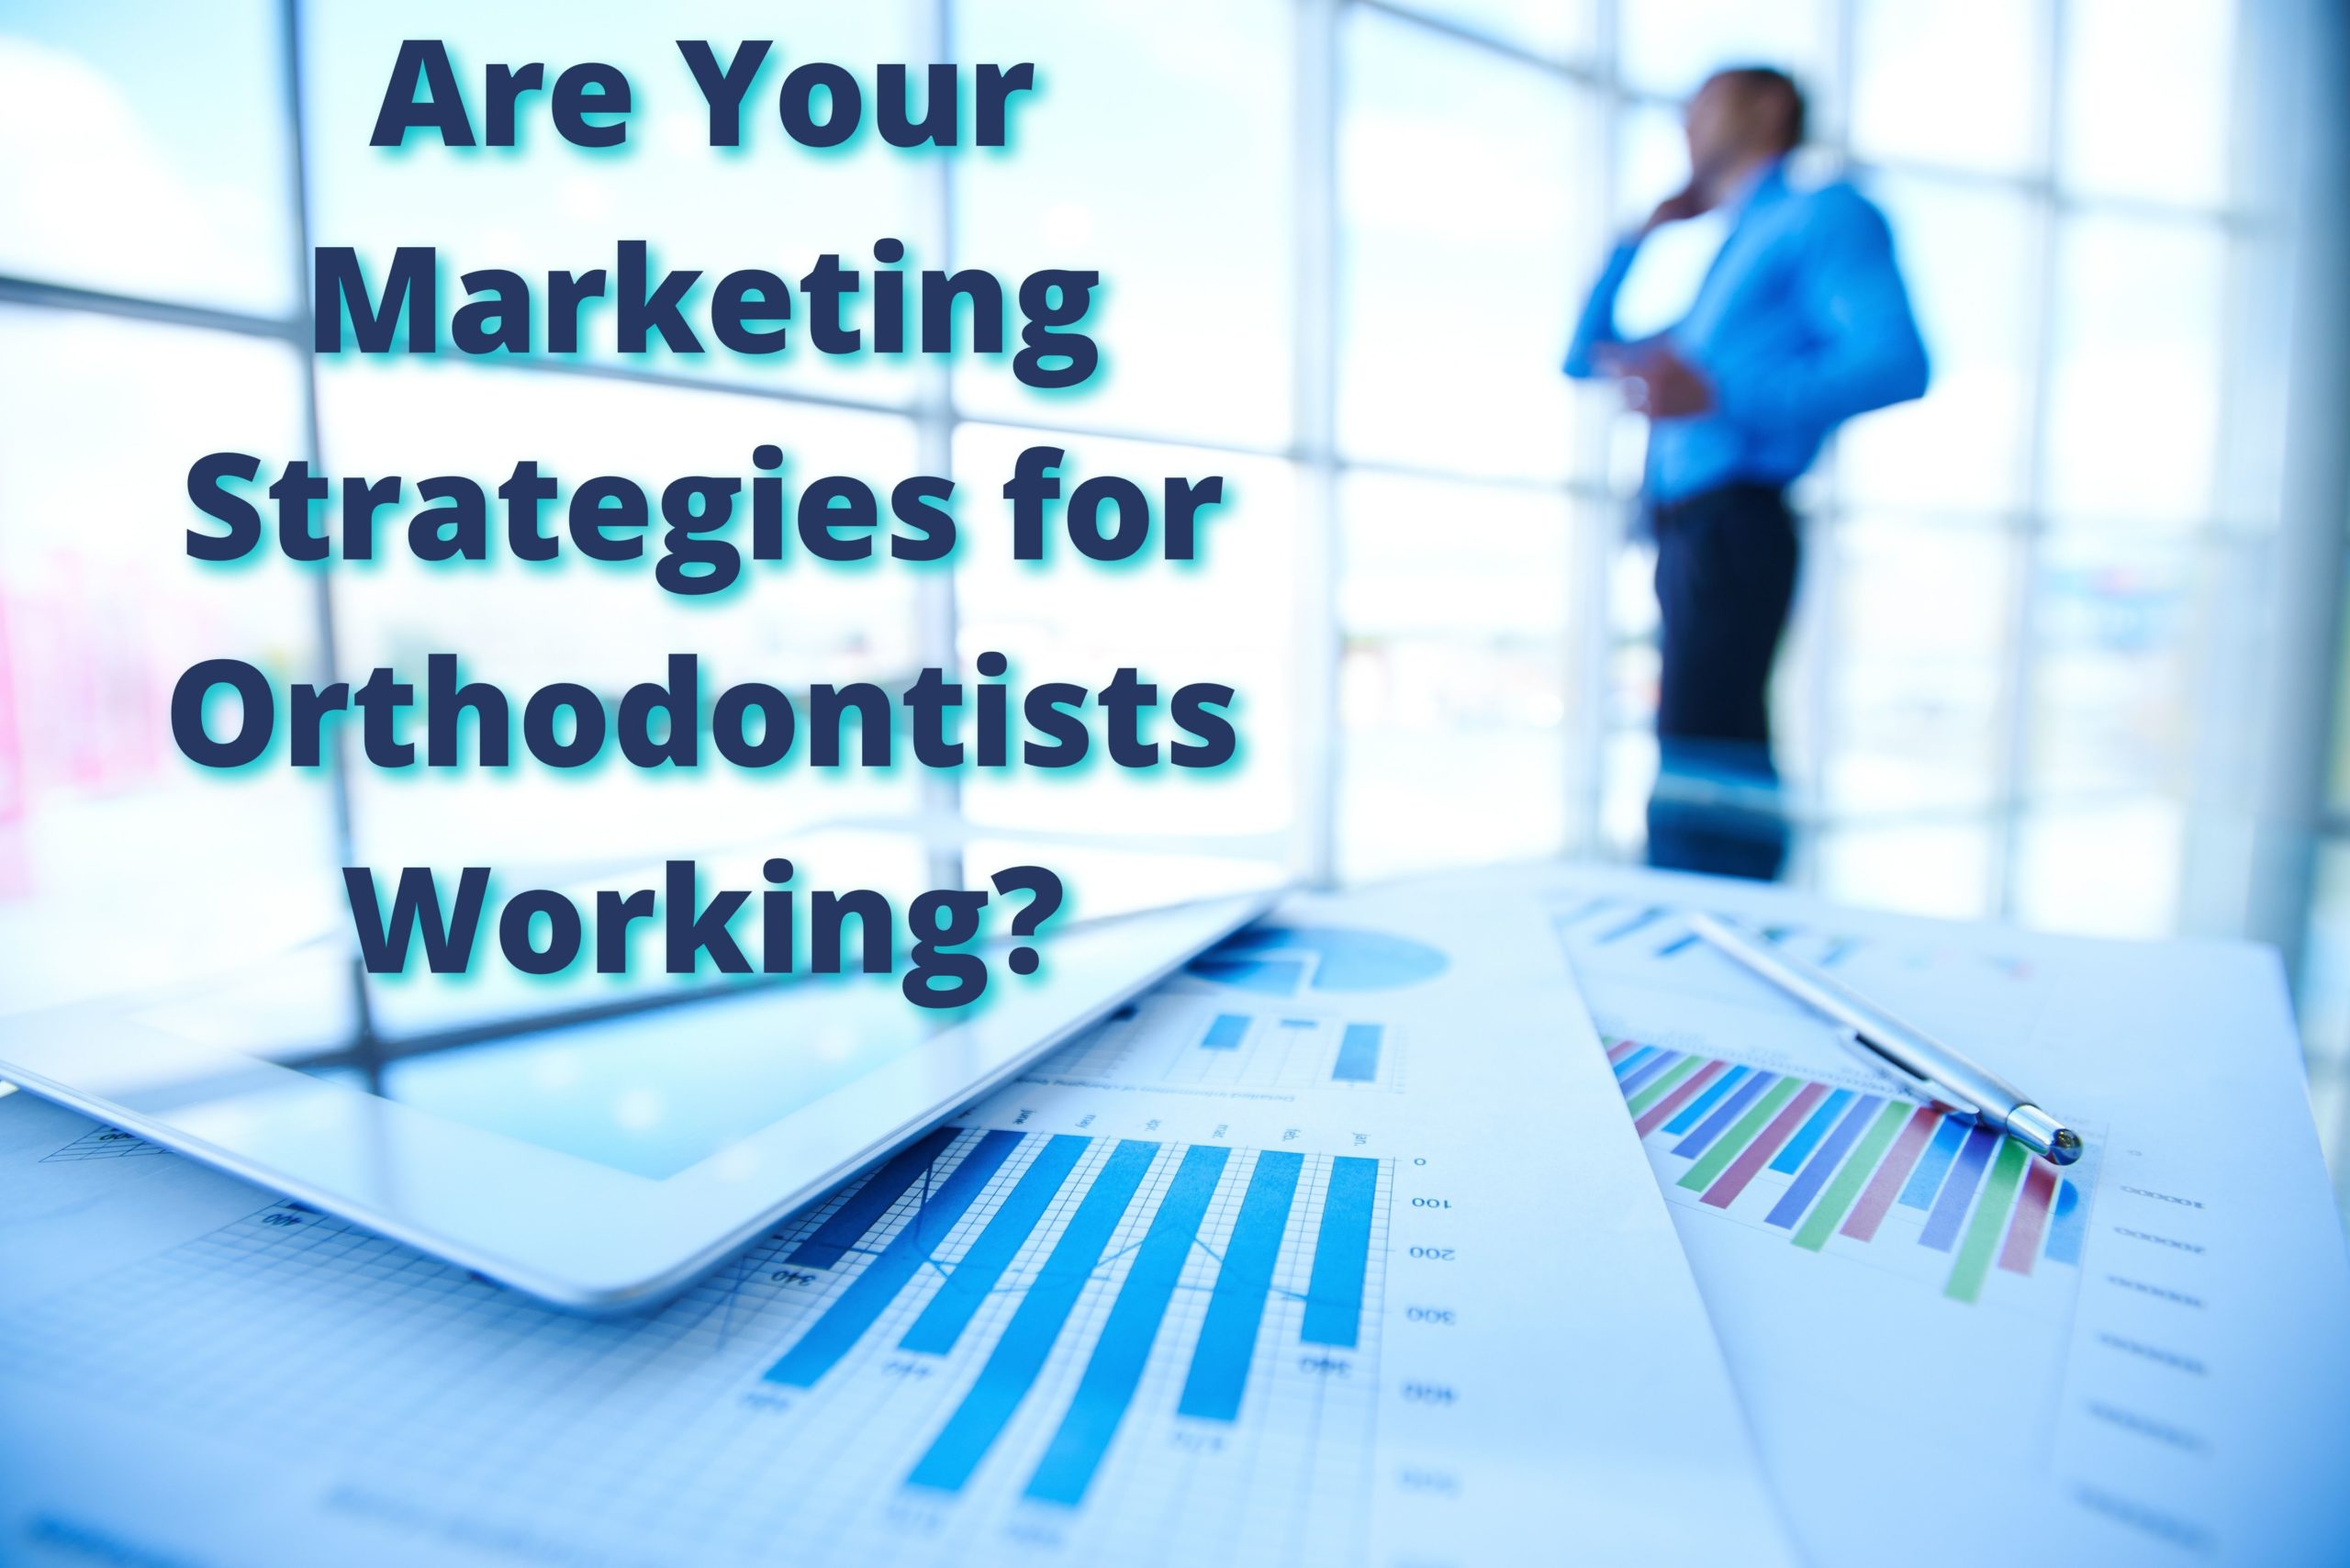 Are Your Marketing Strategies for Orthodontists Working?